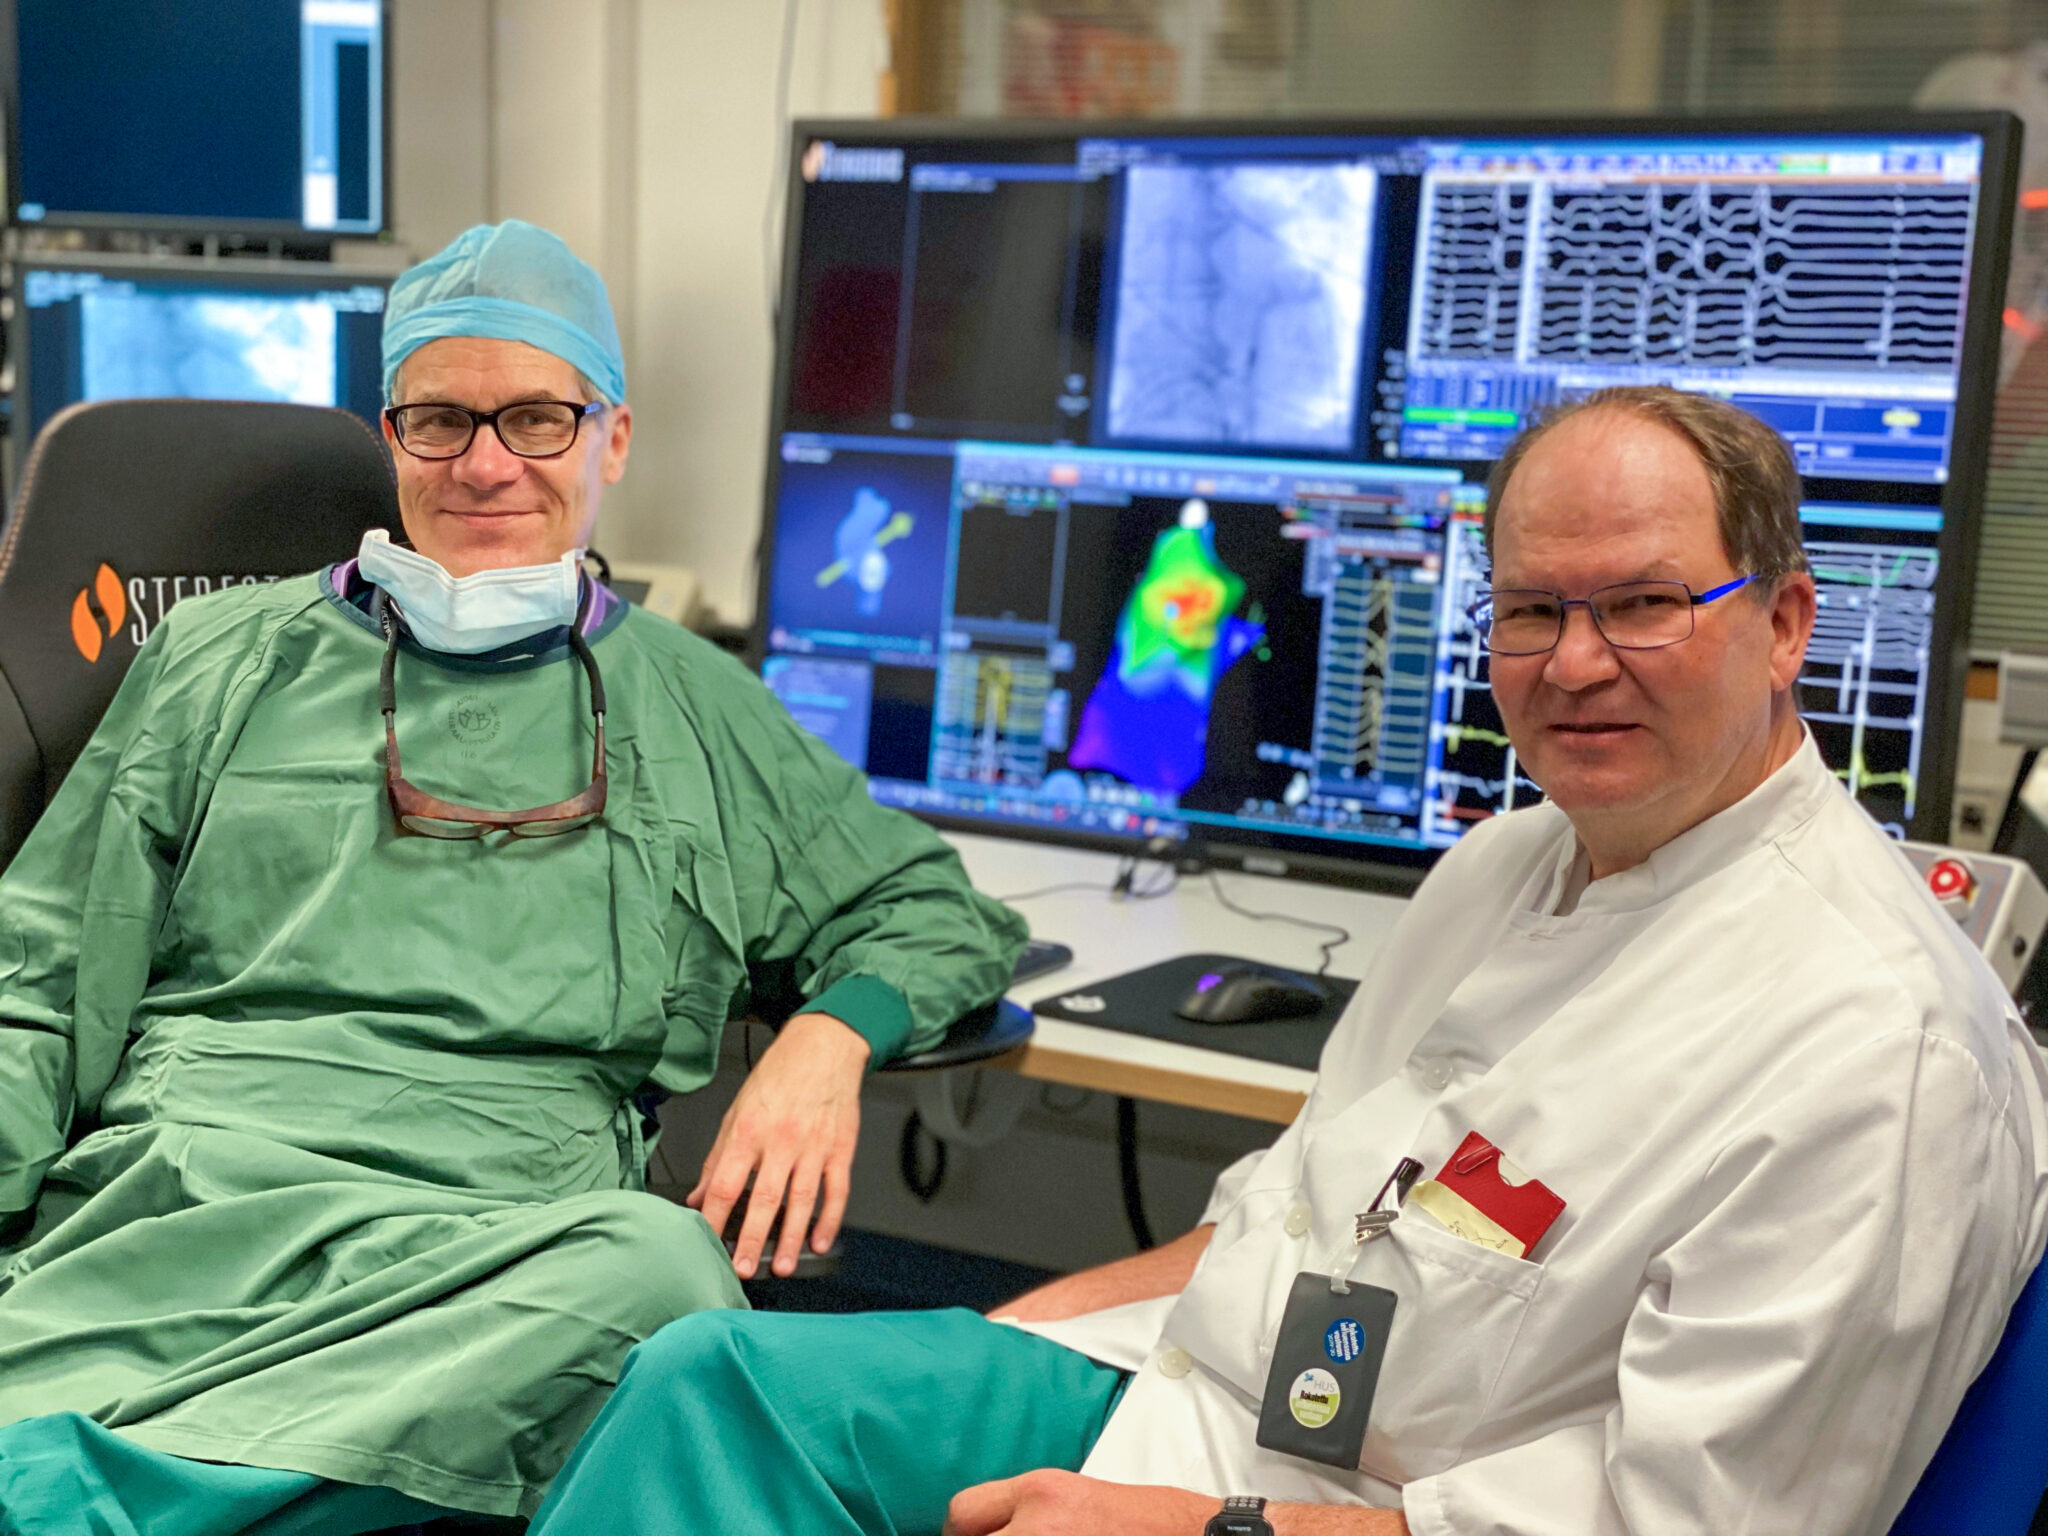 One thousand arrhythmia patients treated using Stereotaxis robotic system